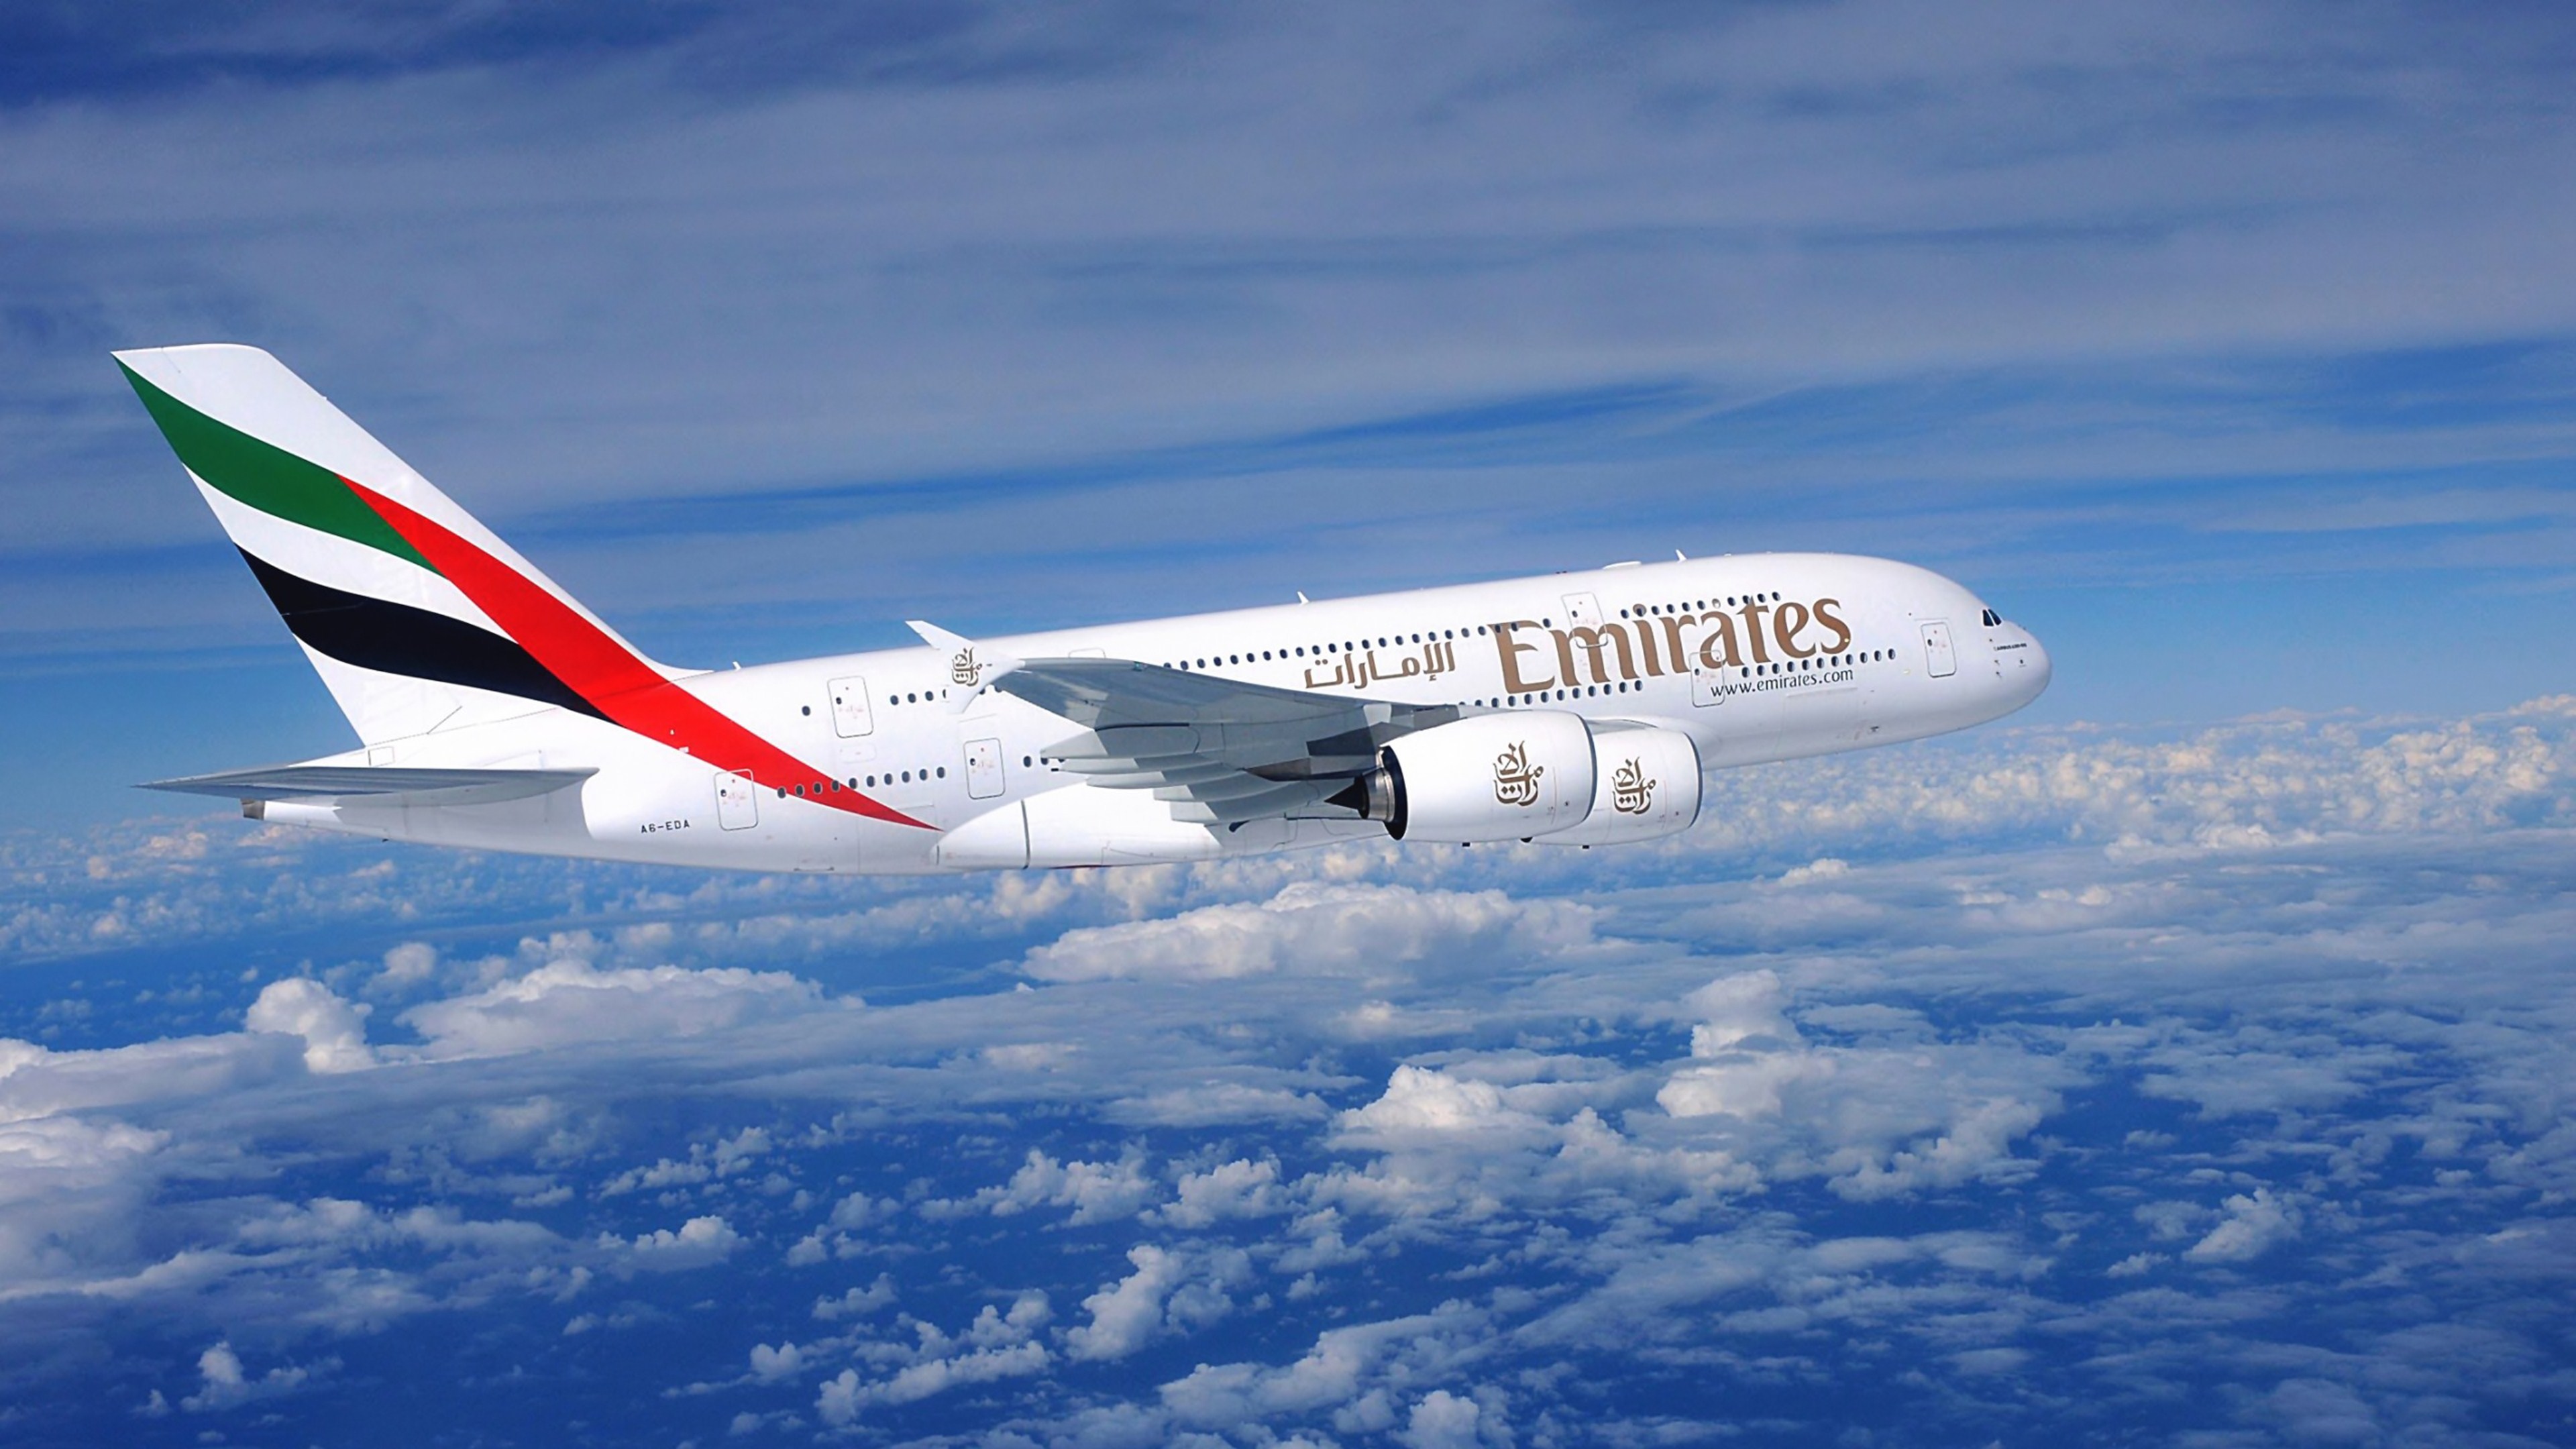 FLY Avion Emirates Airline Airbus A380 Wall Poster Grand format A0 Large Print 